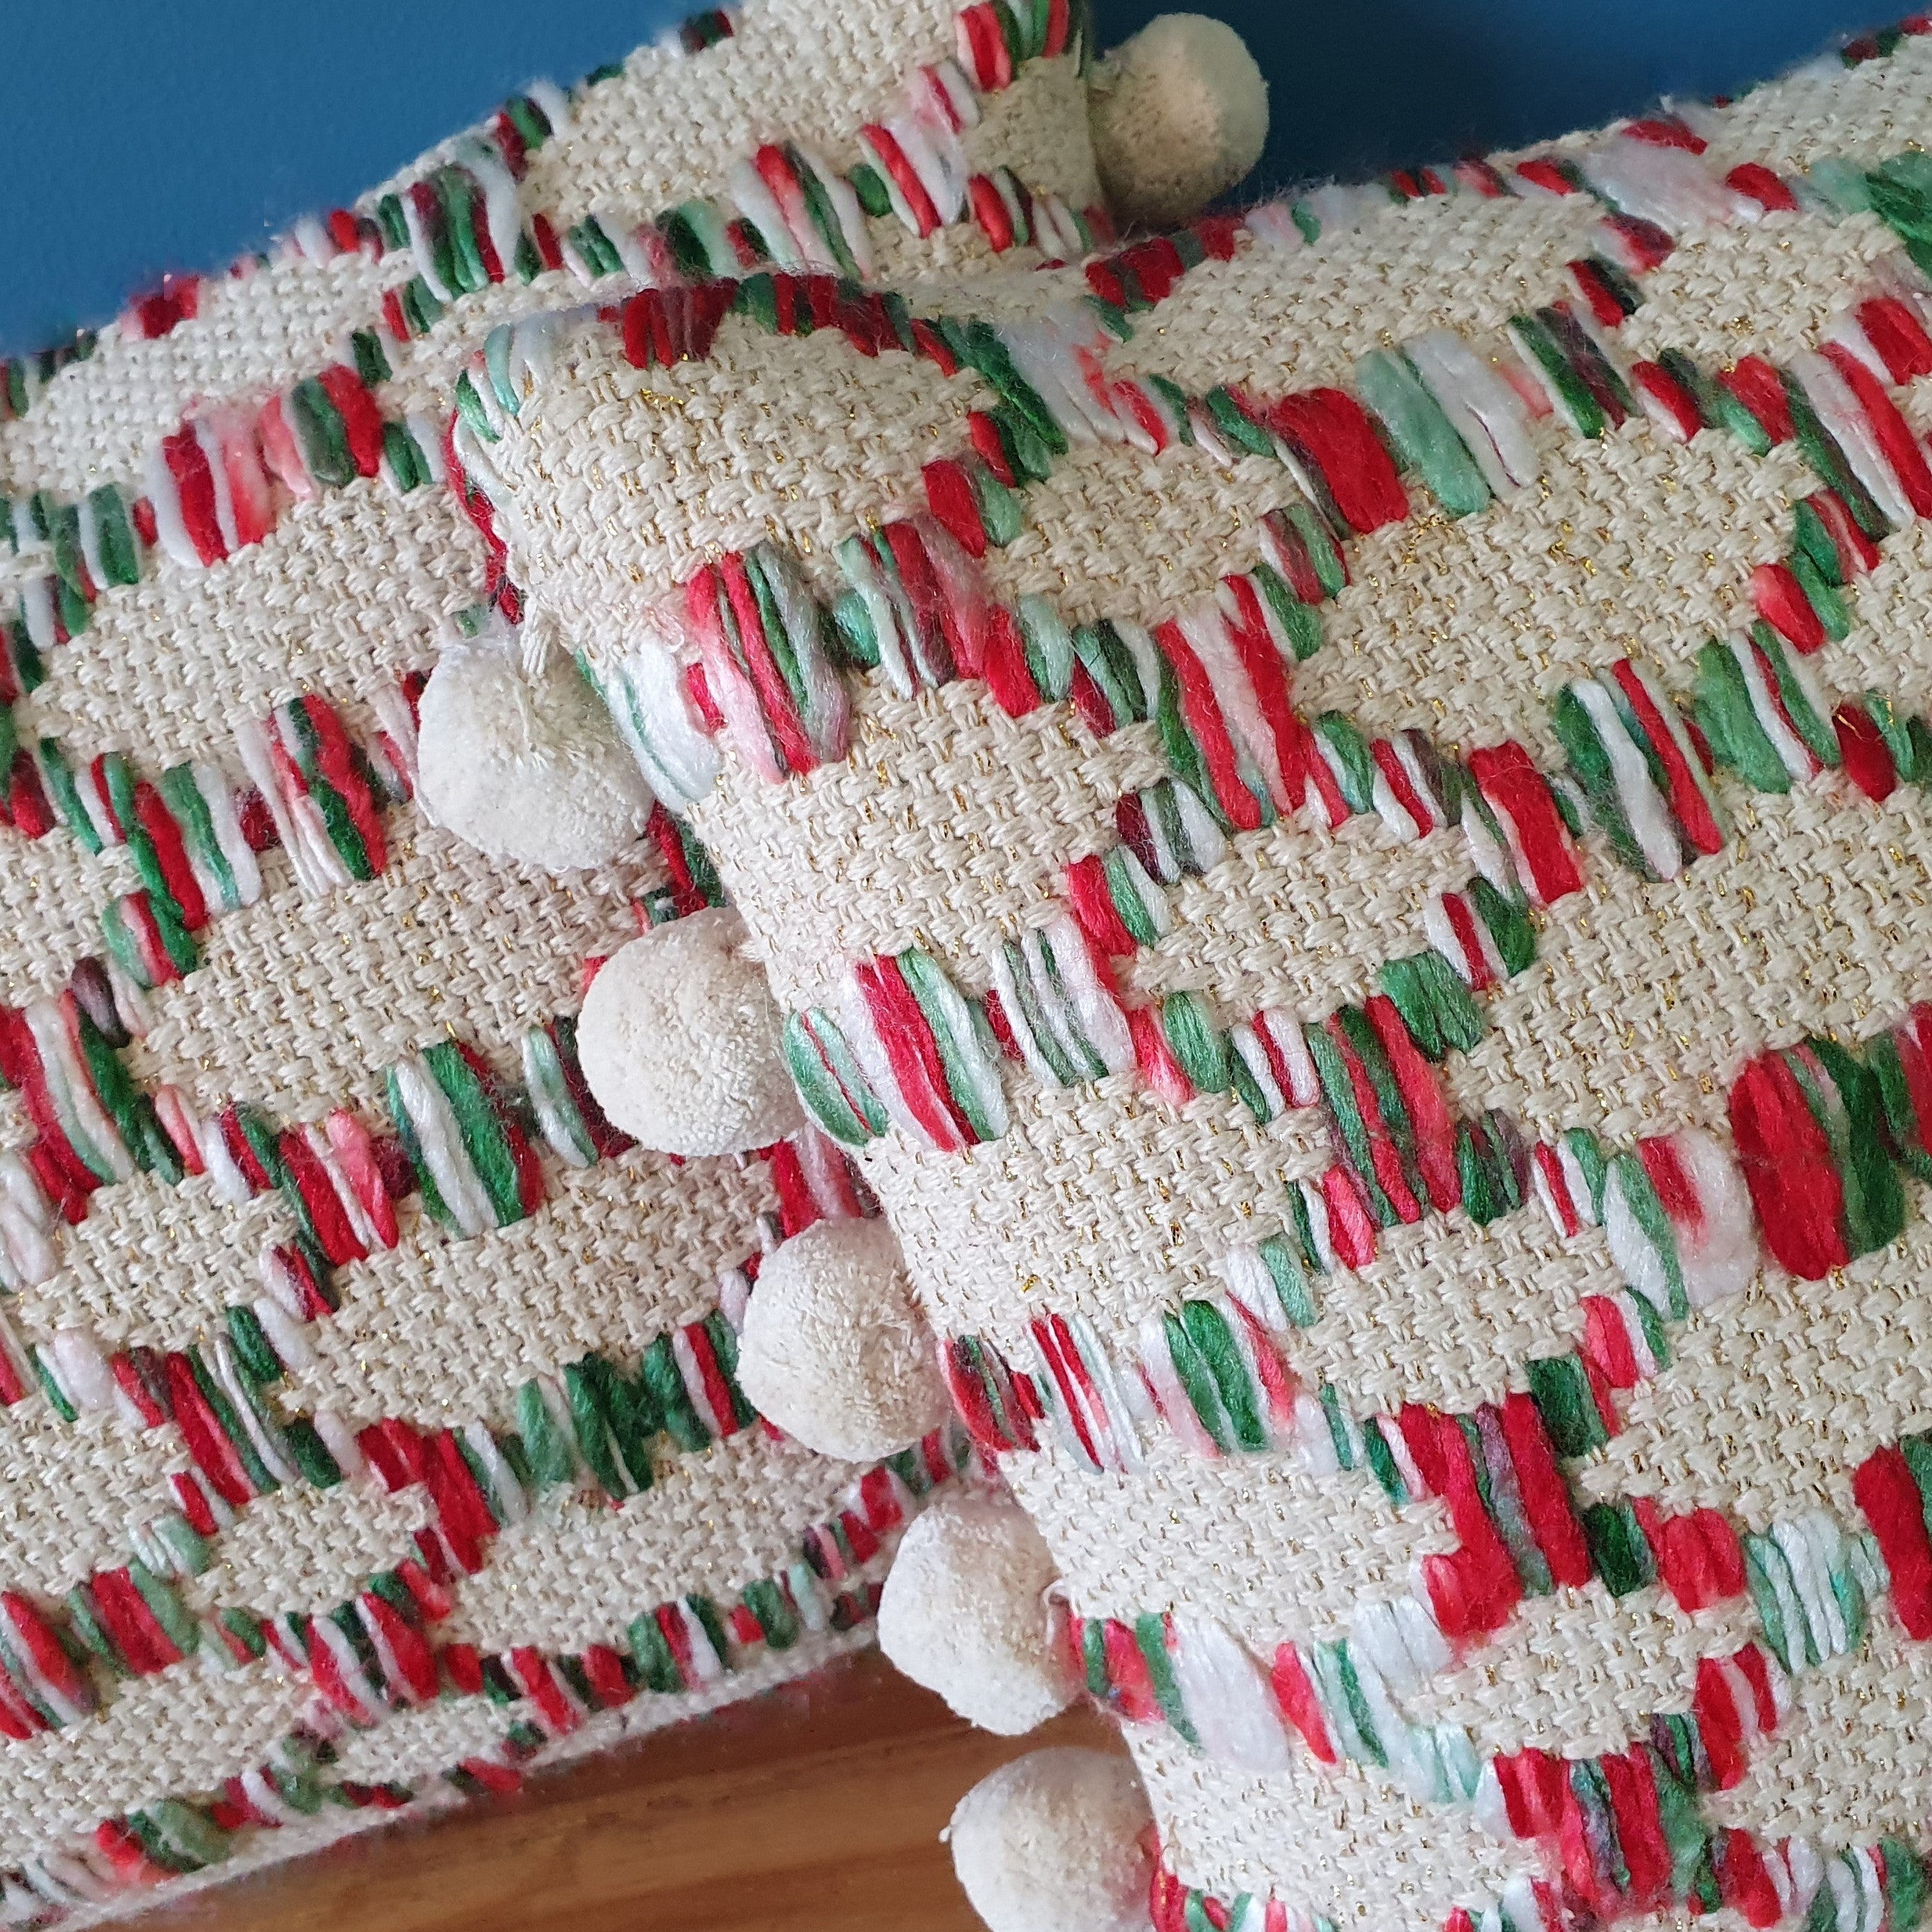 Loganberry Rectangular Cosy Cushion with pom poms